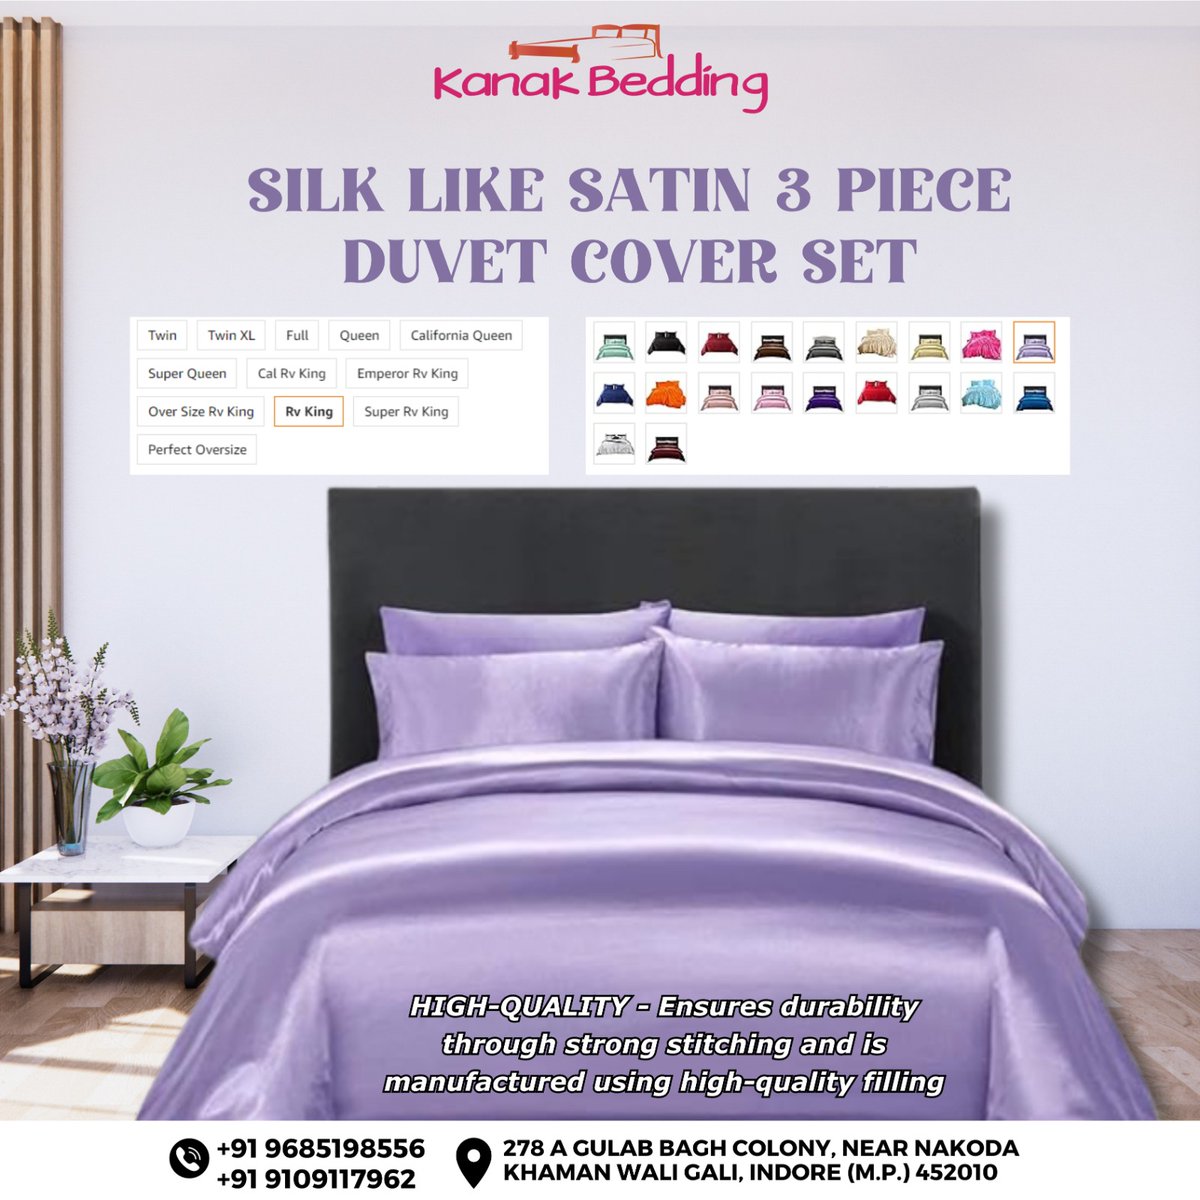 Experience the luxurious comfort of silk-like satin with our exquisite 3-piece duvet cover set from Kanak Bedding. Elevate your sleep sanctuary with elegance and sophistication. 

Shop now and indulge in the ultimate bedtime luxury!
.
.
.
.
#LuxuriousComfort #SilkSatin